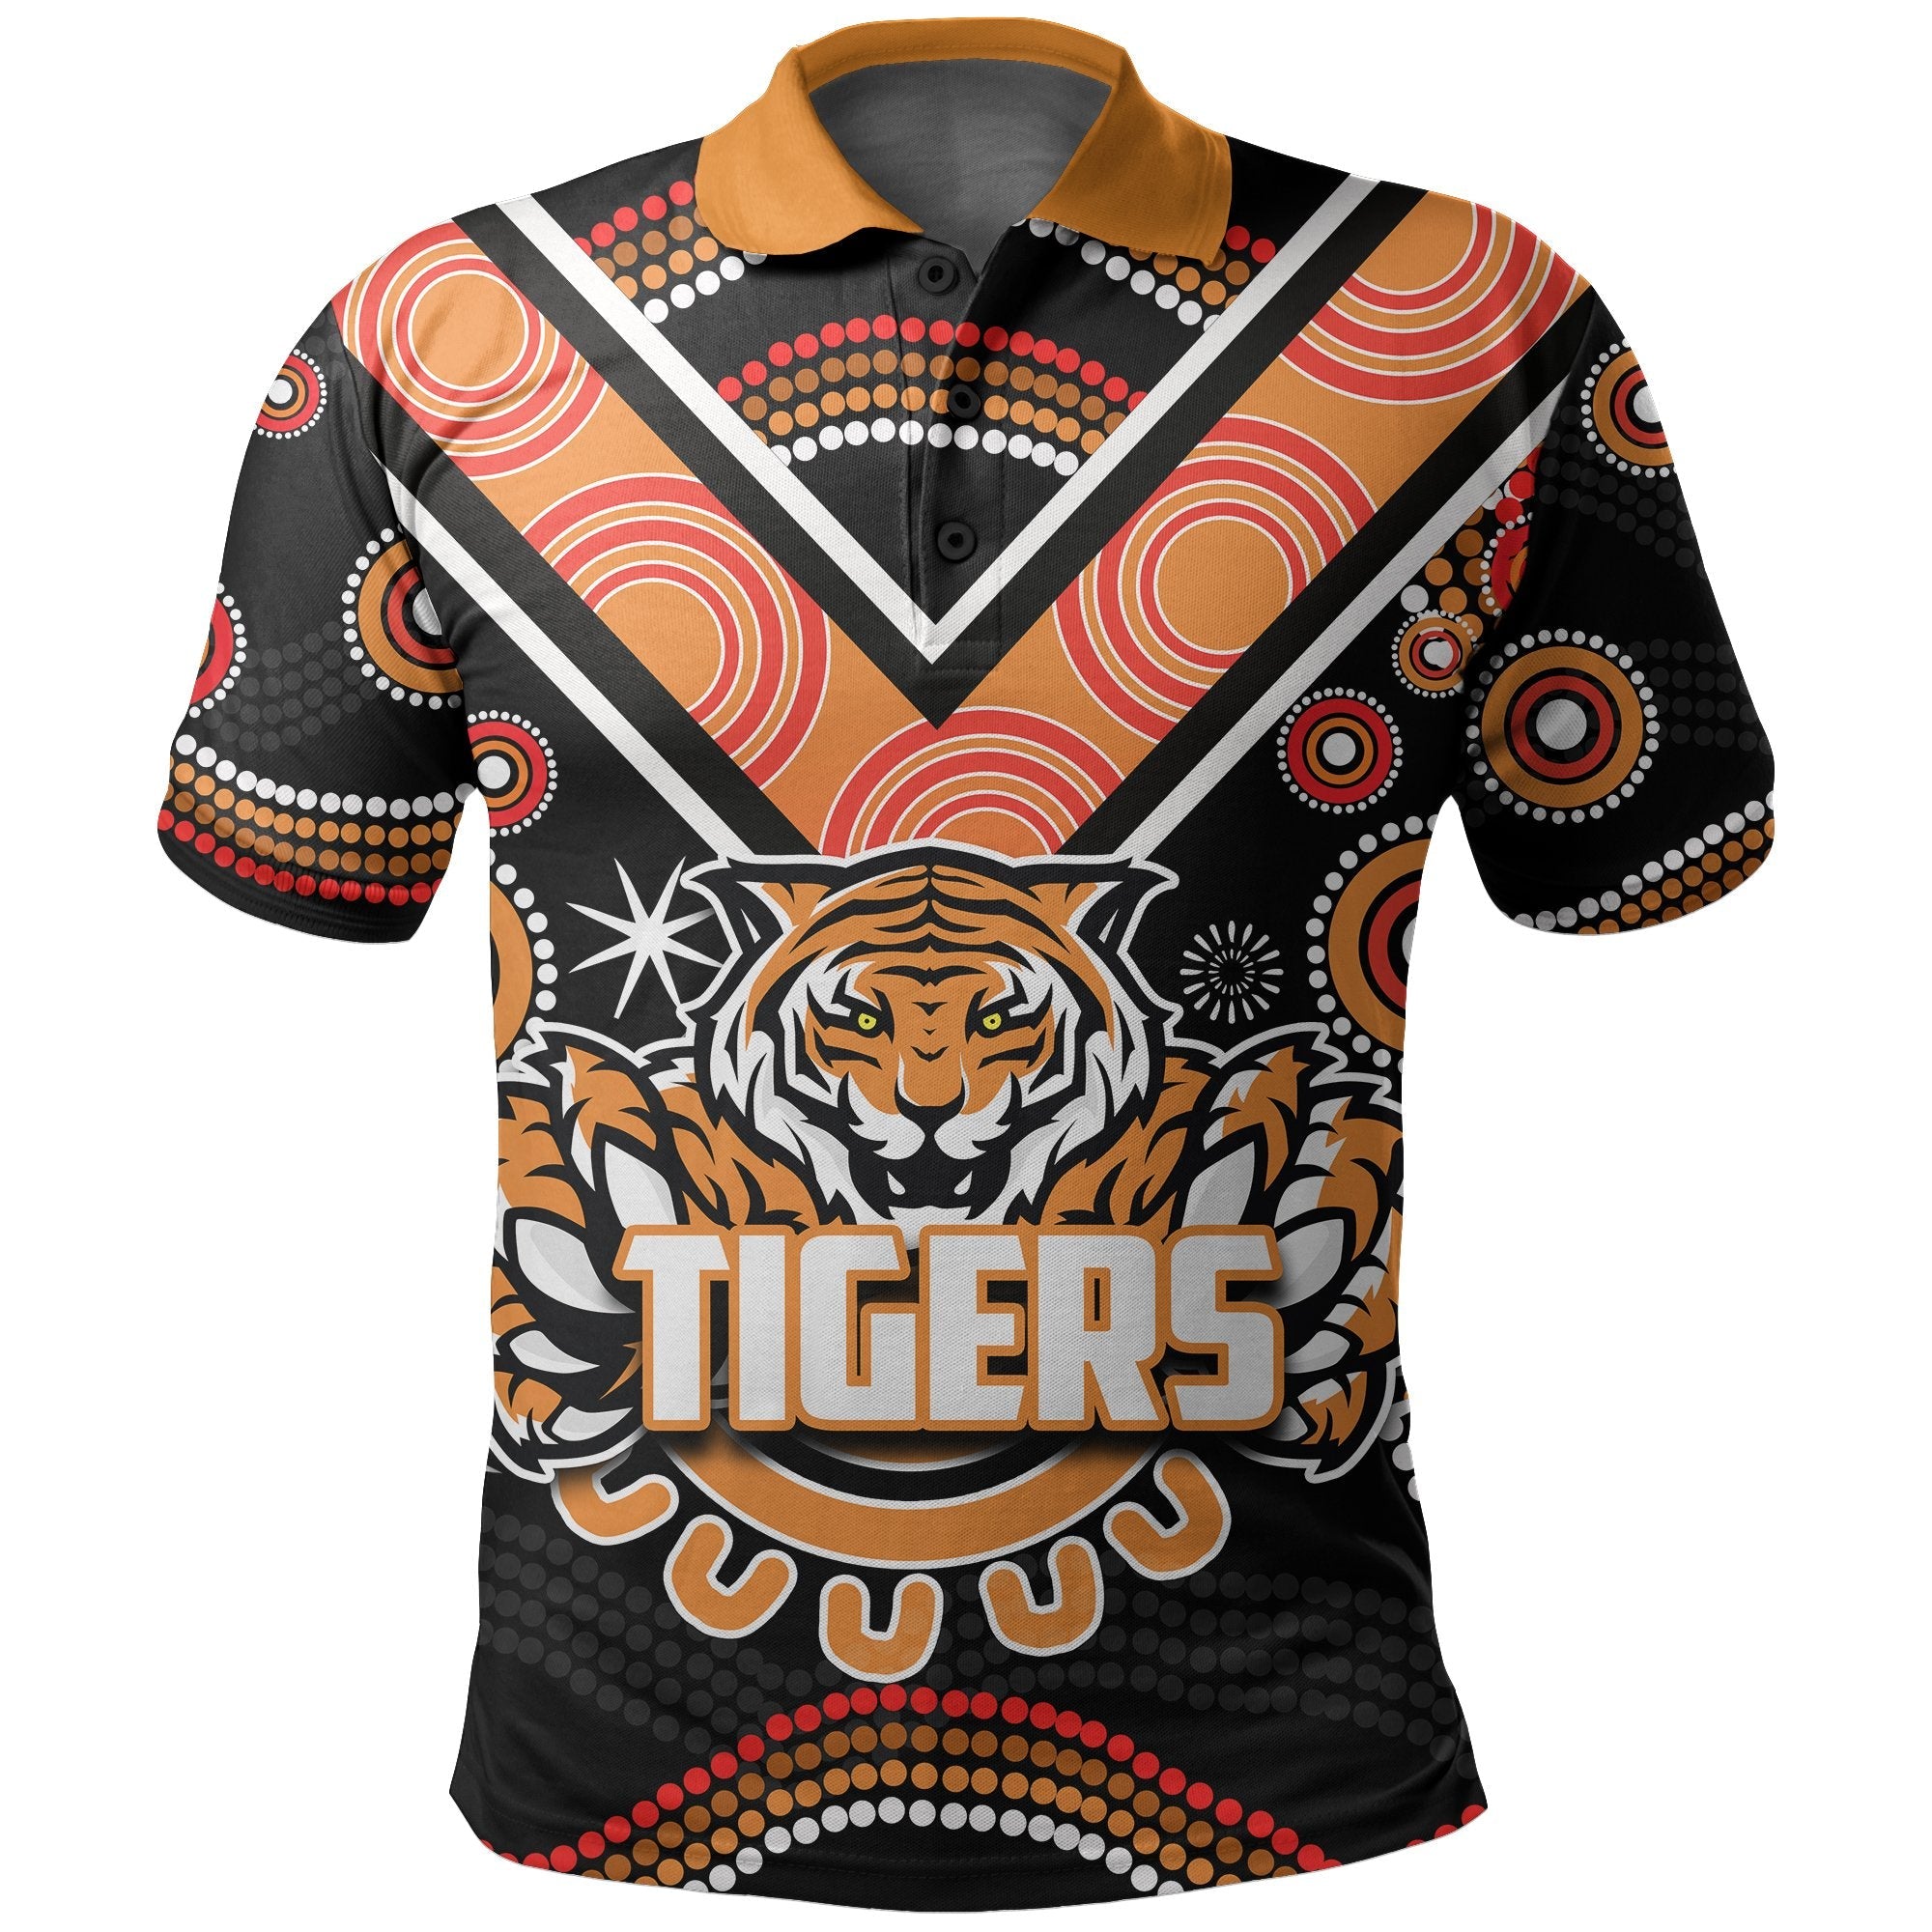 wests-tigers-polo-shirt-aboriginal-style